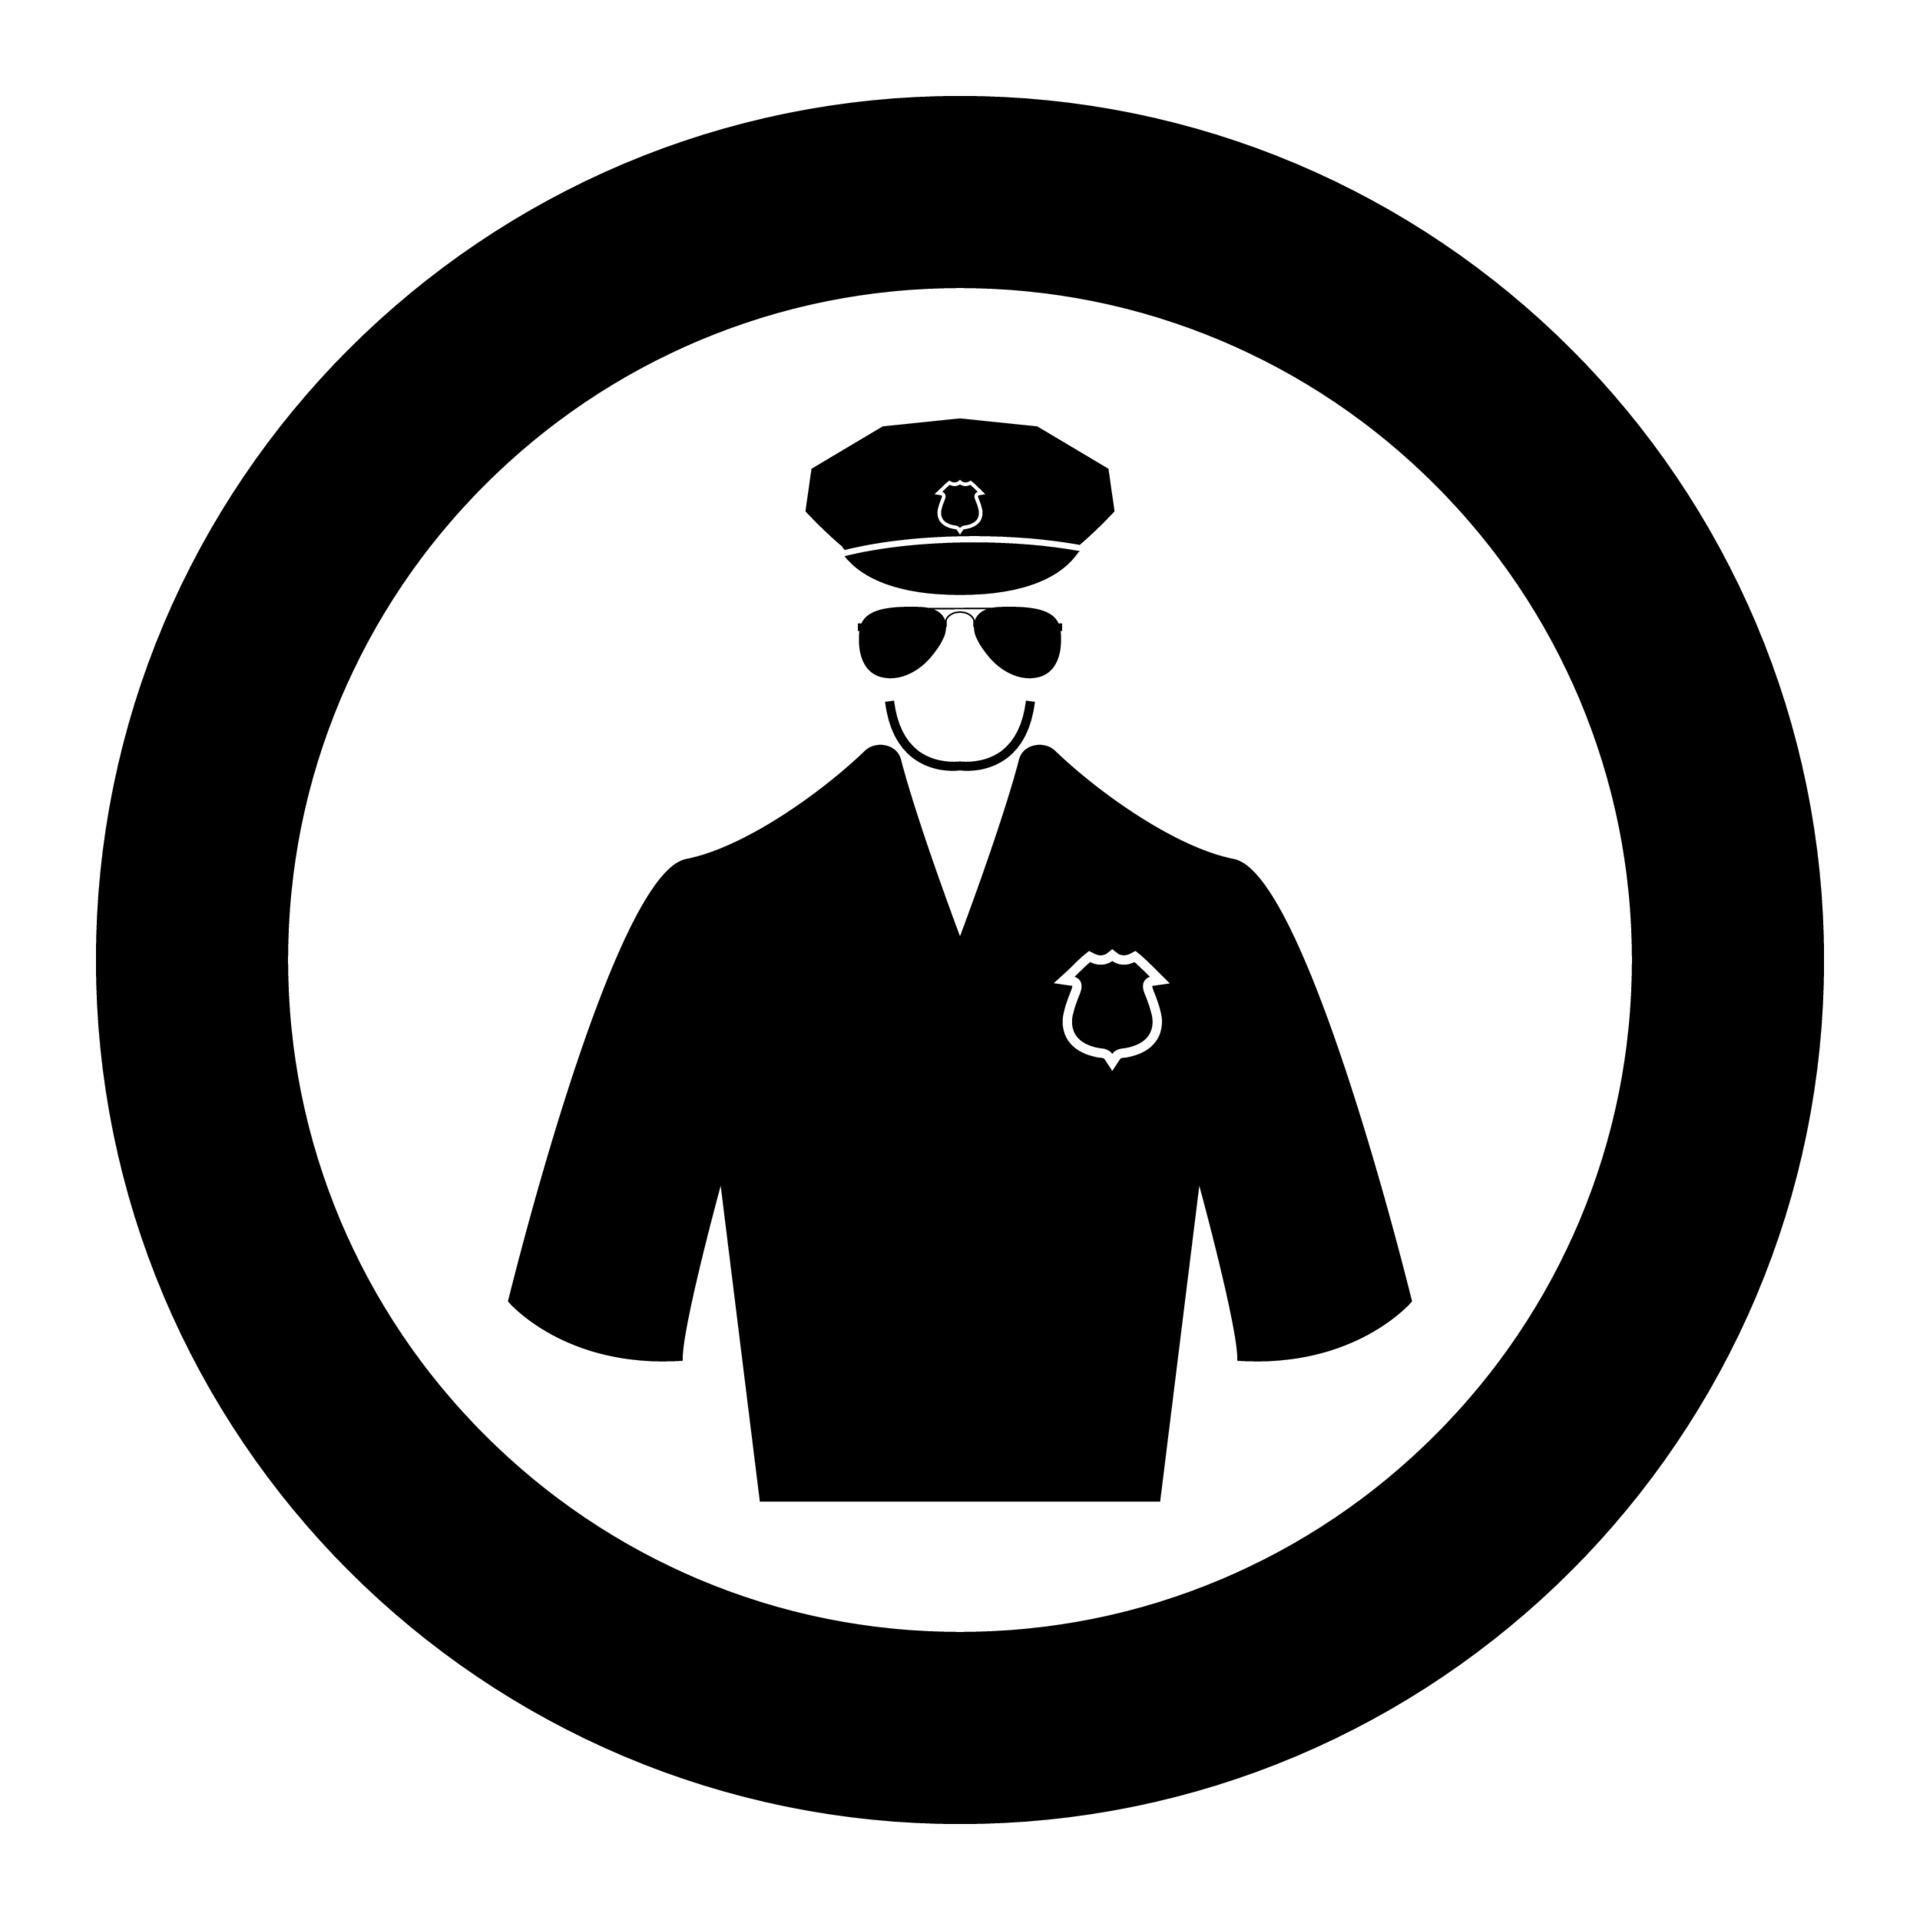 Police black icon in circle vector illustration isolated . 7013307 ...